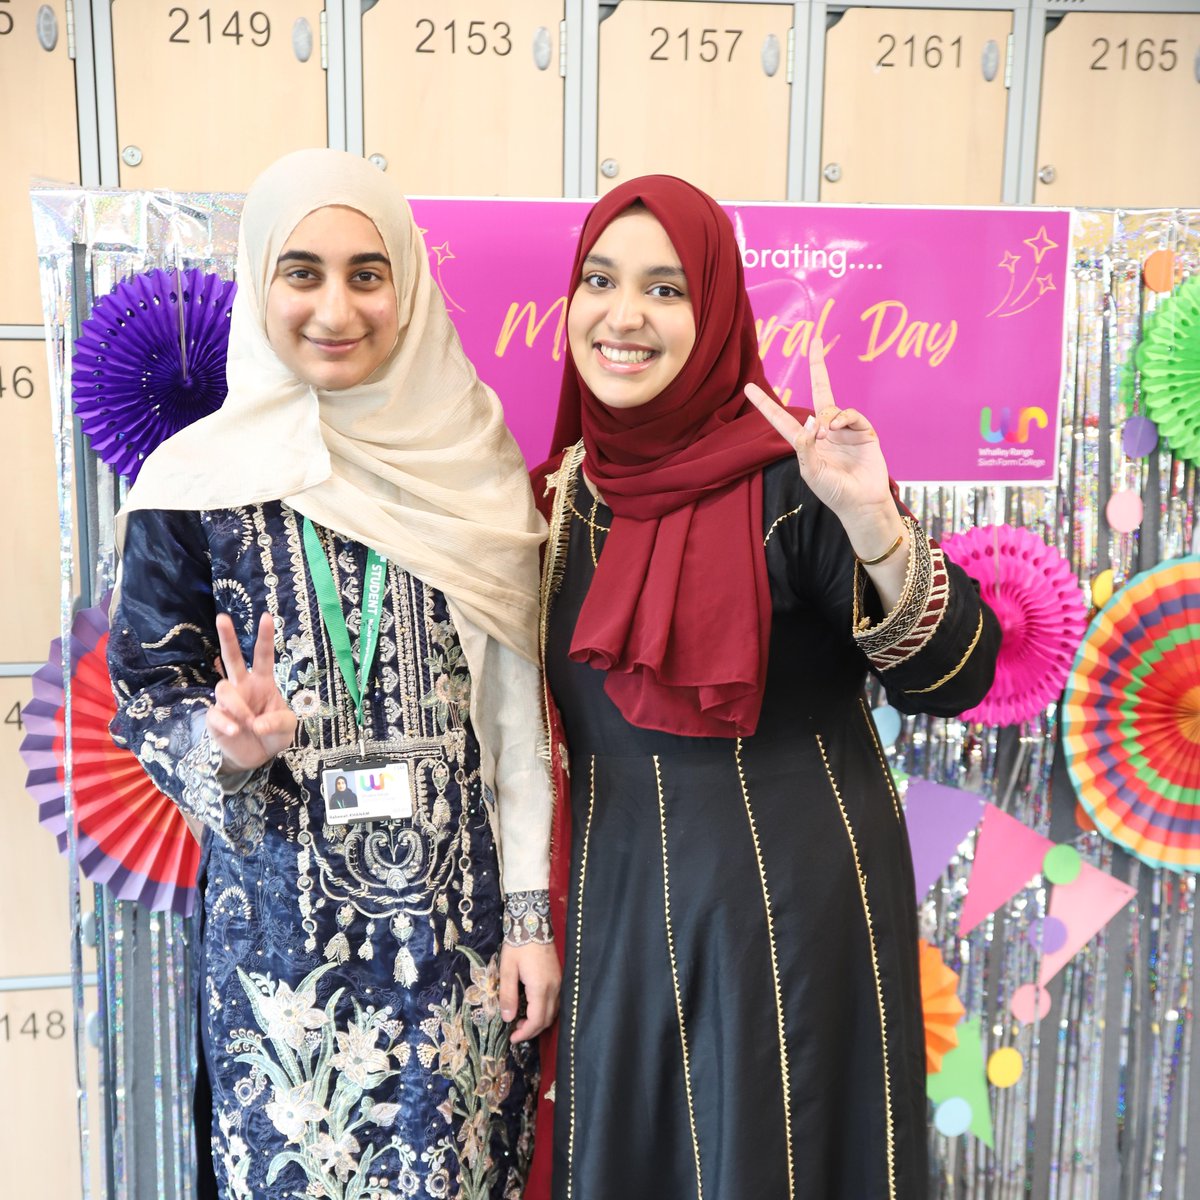 Our Sixth Form students had a fantastic Multicultural Day today! We love to celebrate the diversity of our whole school community. Have a lovely weekend everyone!